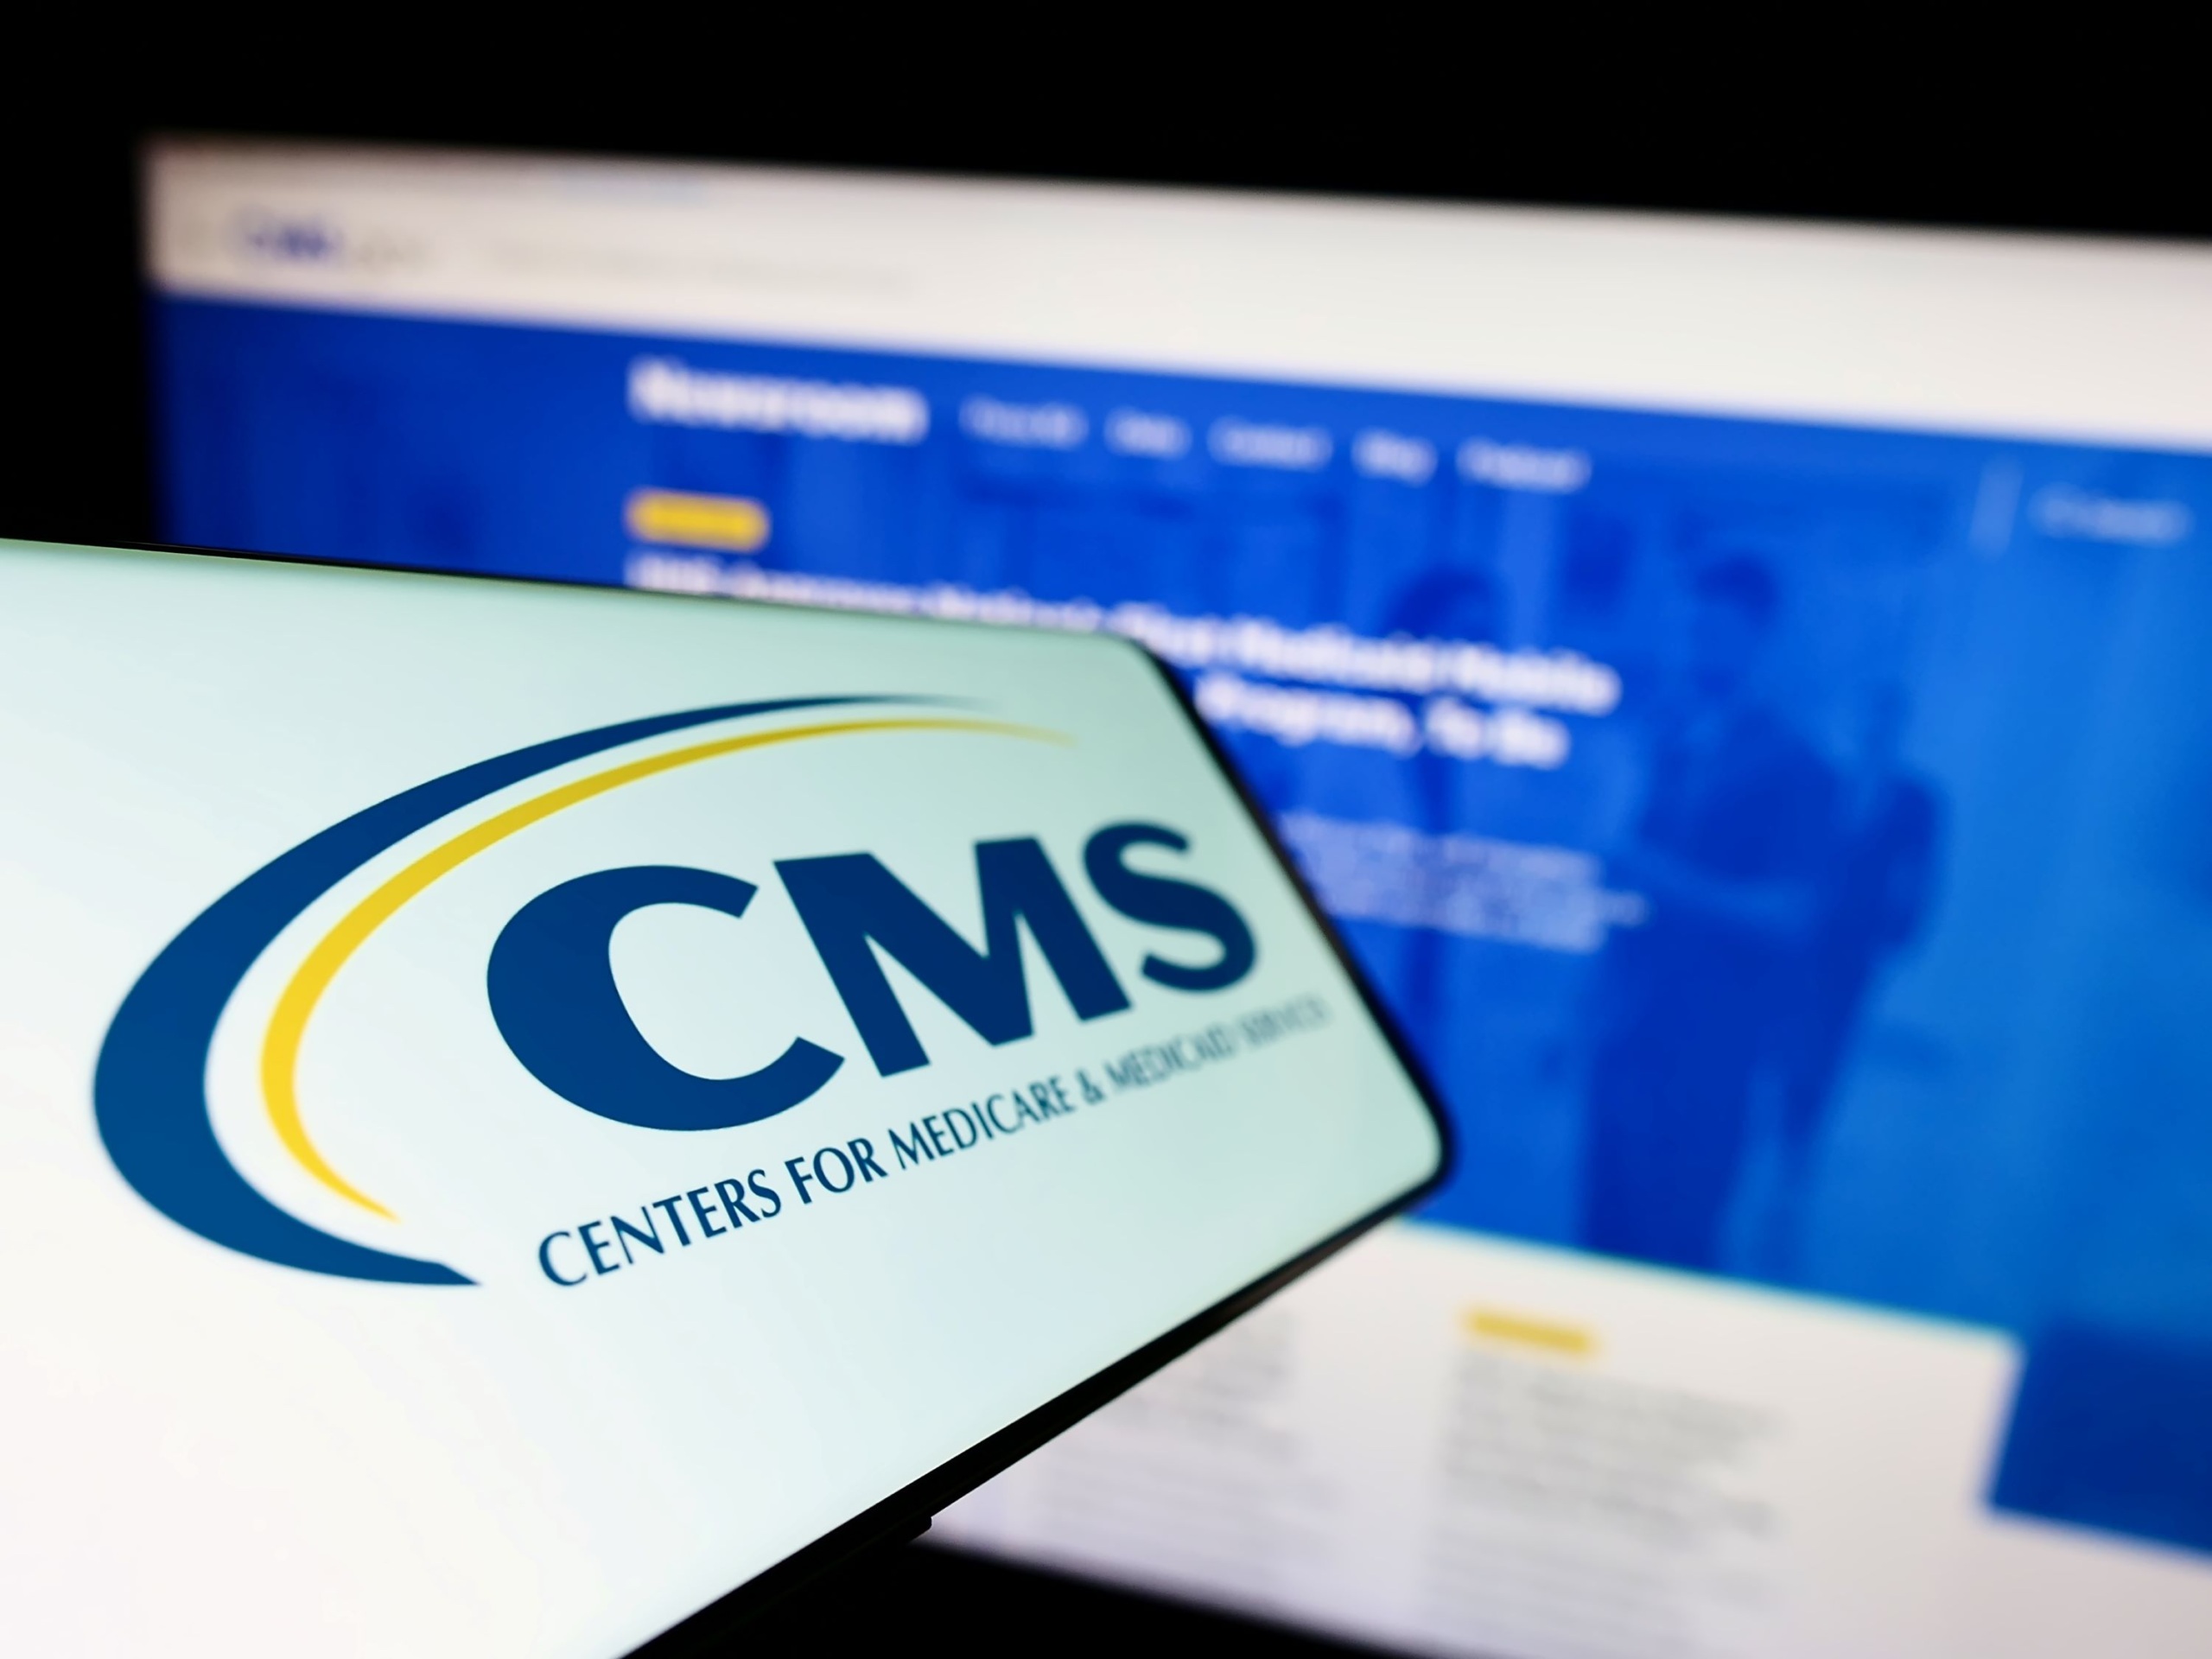 Smartphone and computer displaying CMS logo and CMS.gov webpage